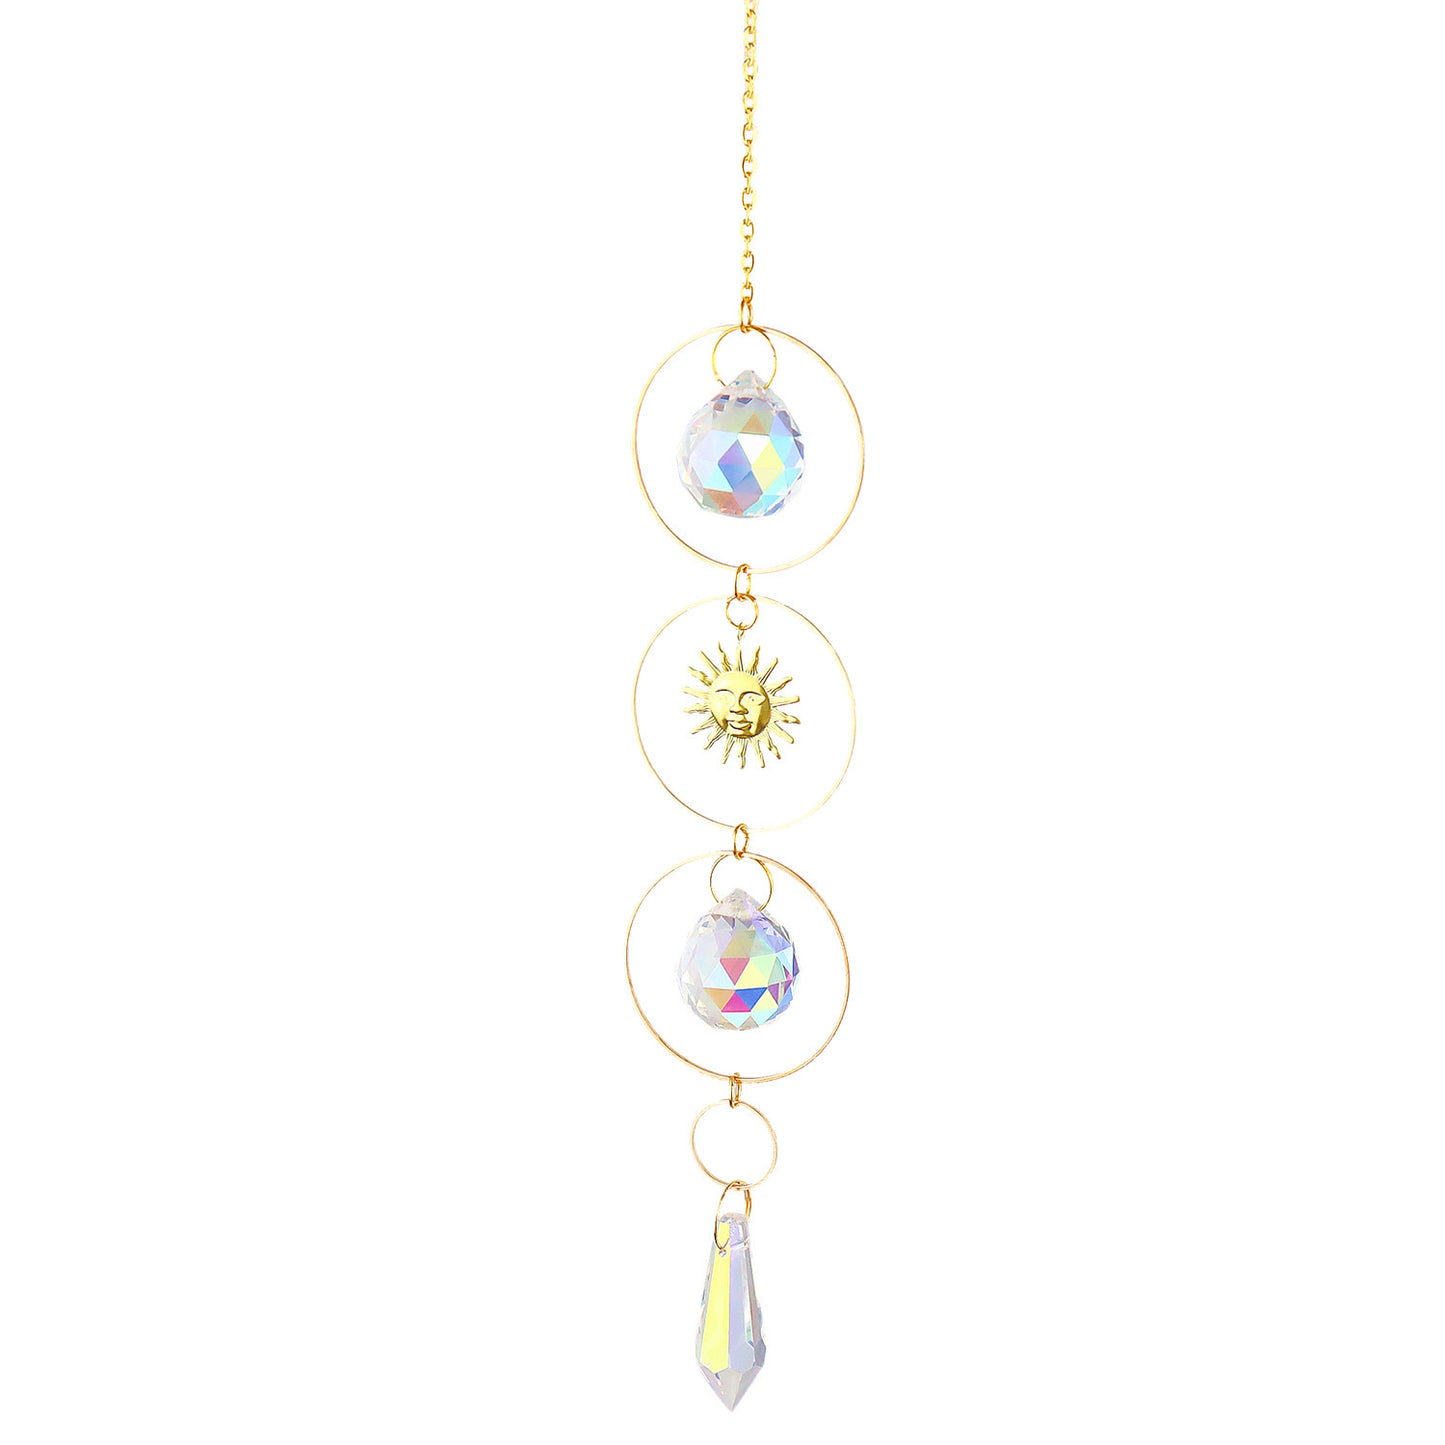 K9 Aura Crystal Hanger Full Moons in 2 Rings with Sun Design & Point Brass Color Hanger - Long inch - China - NEW911